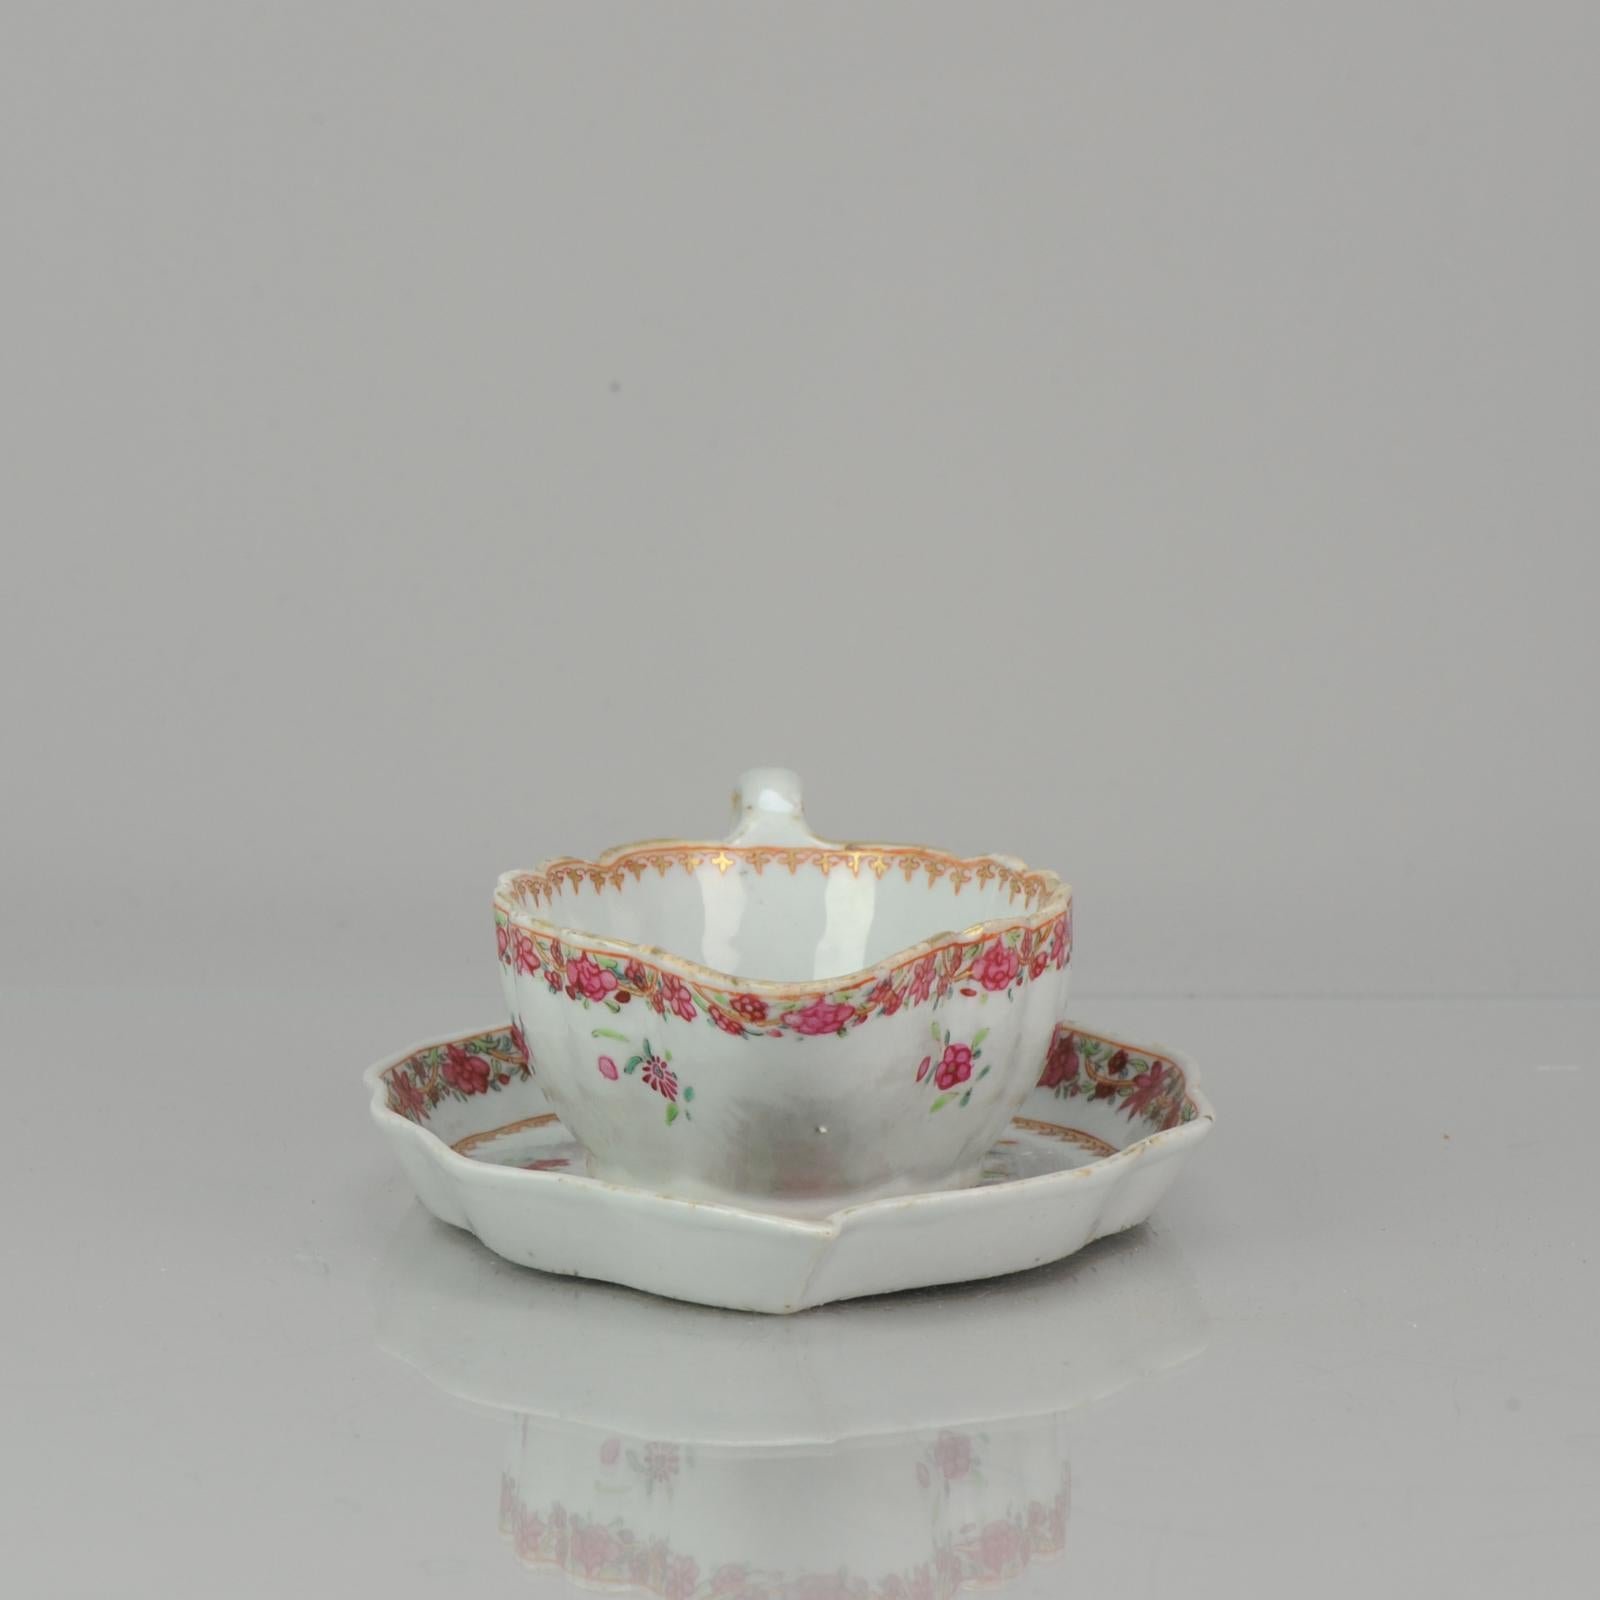 Antique Chinese Porcelain Famille Rose Qianlong Leaf Sauceboat Bowl, 18th Cen In Good Condition For Sale In Amsterdam, Noord Holland